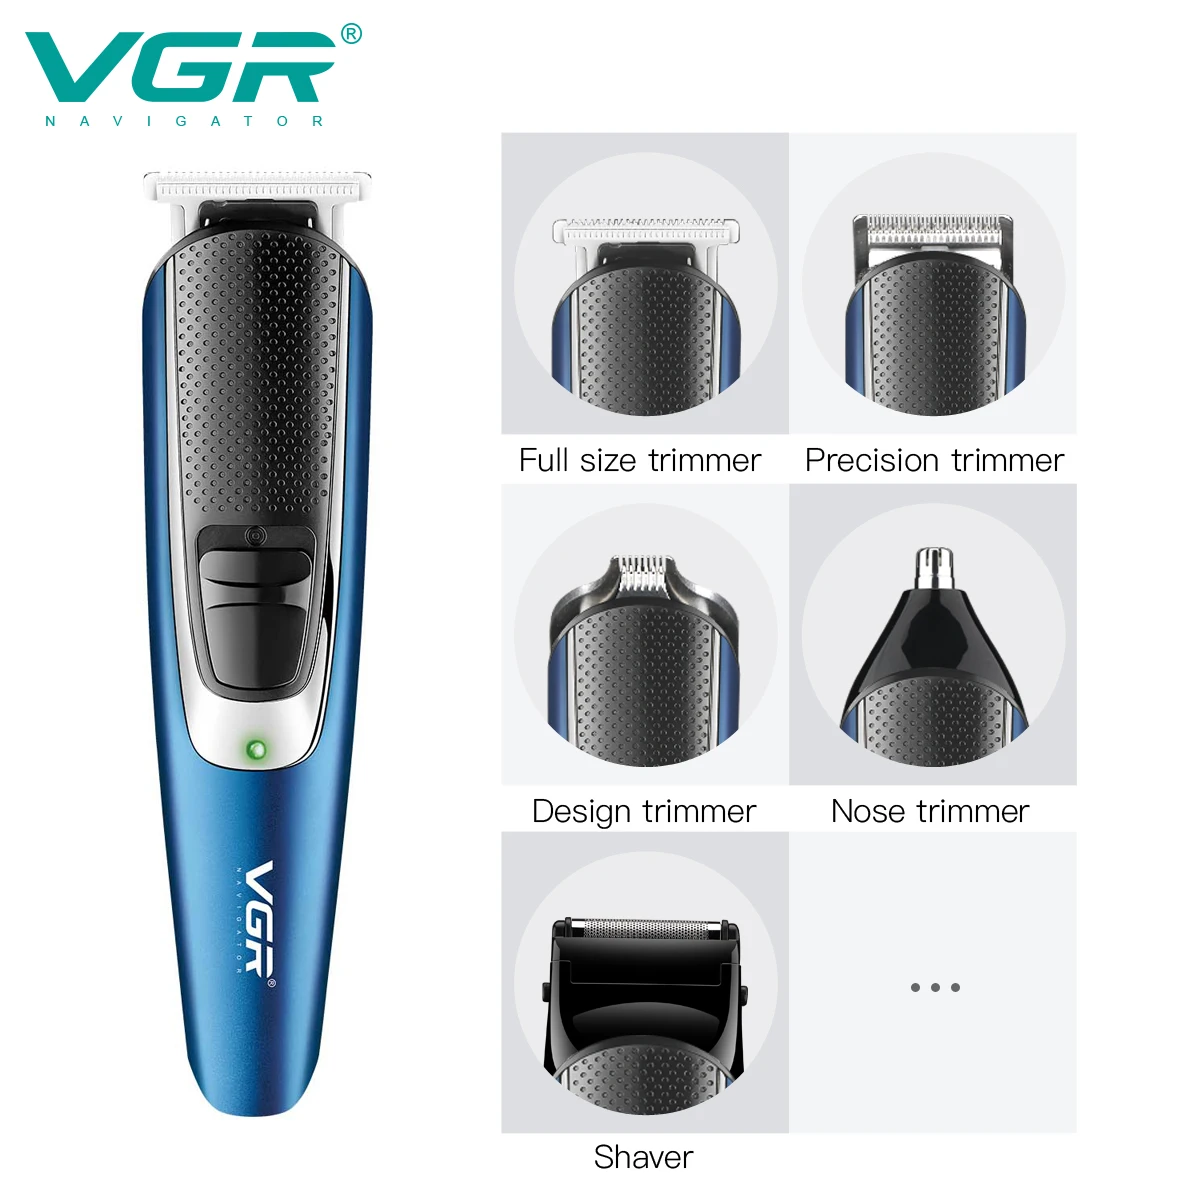 VGR Hair Trimmer Grooming Kit Professional Hair Clipper Hair Cutting Machine Electric Shaver Nose Hair Trimmer Household V-172 enlarge